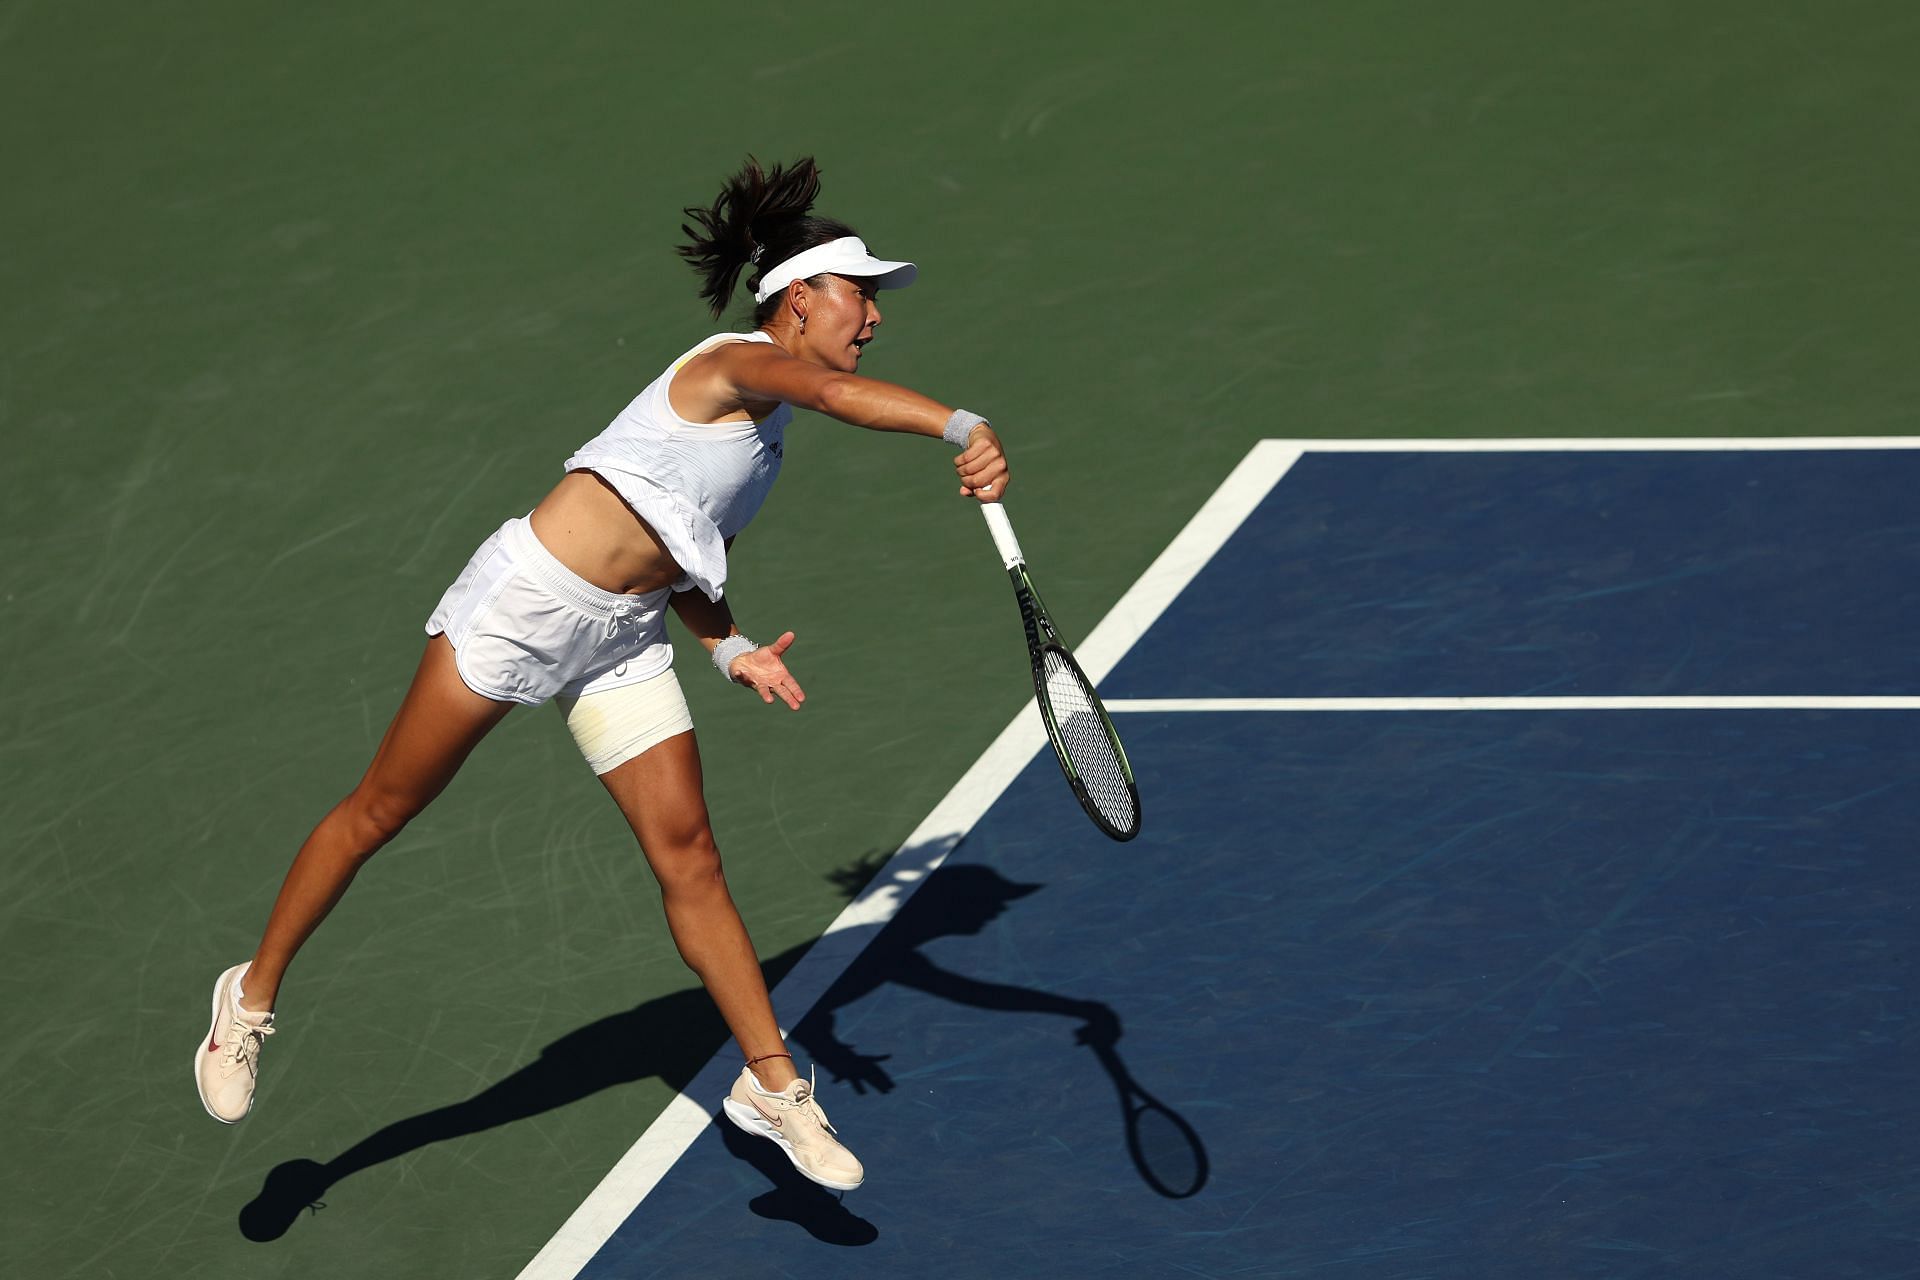 Yue Yuan serves at the 2022 US Open